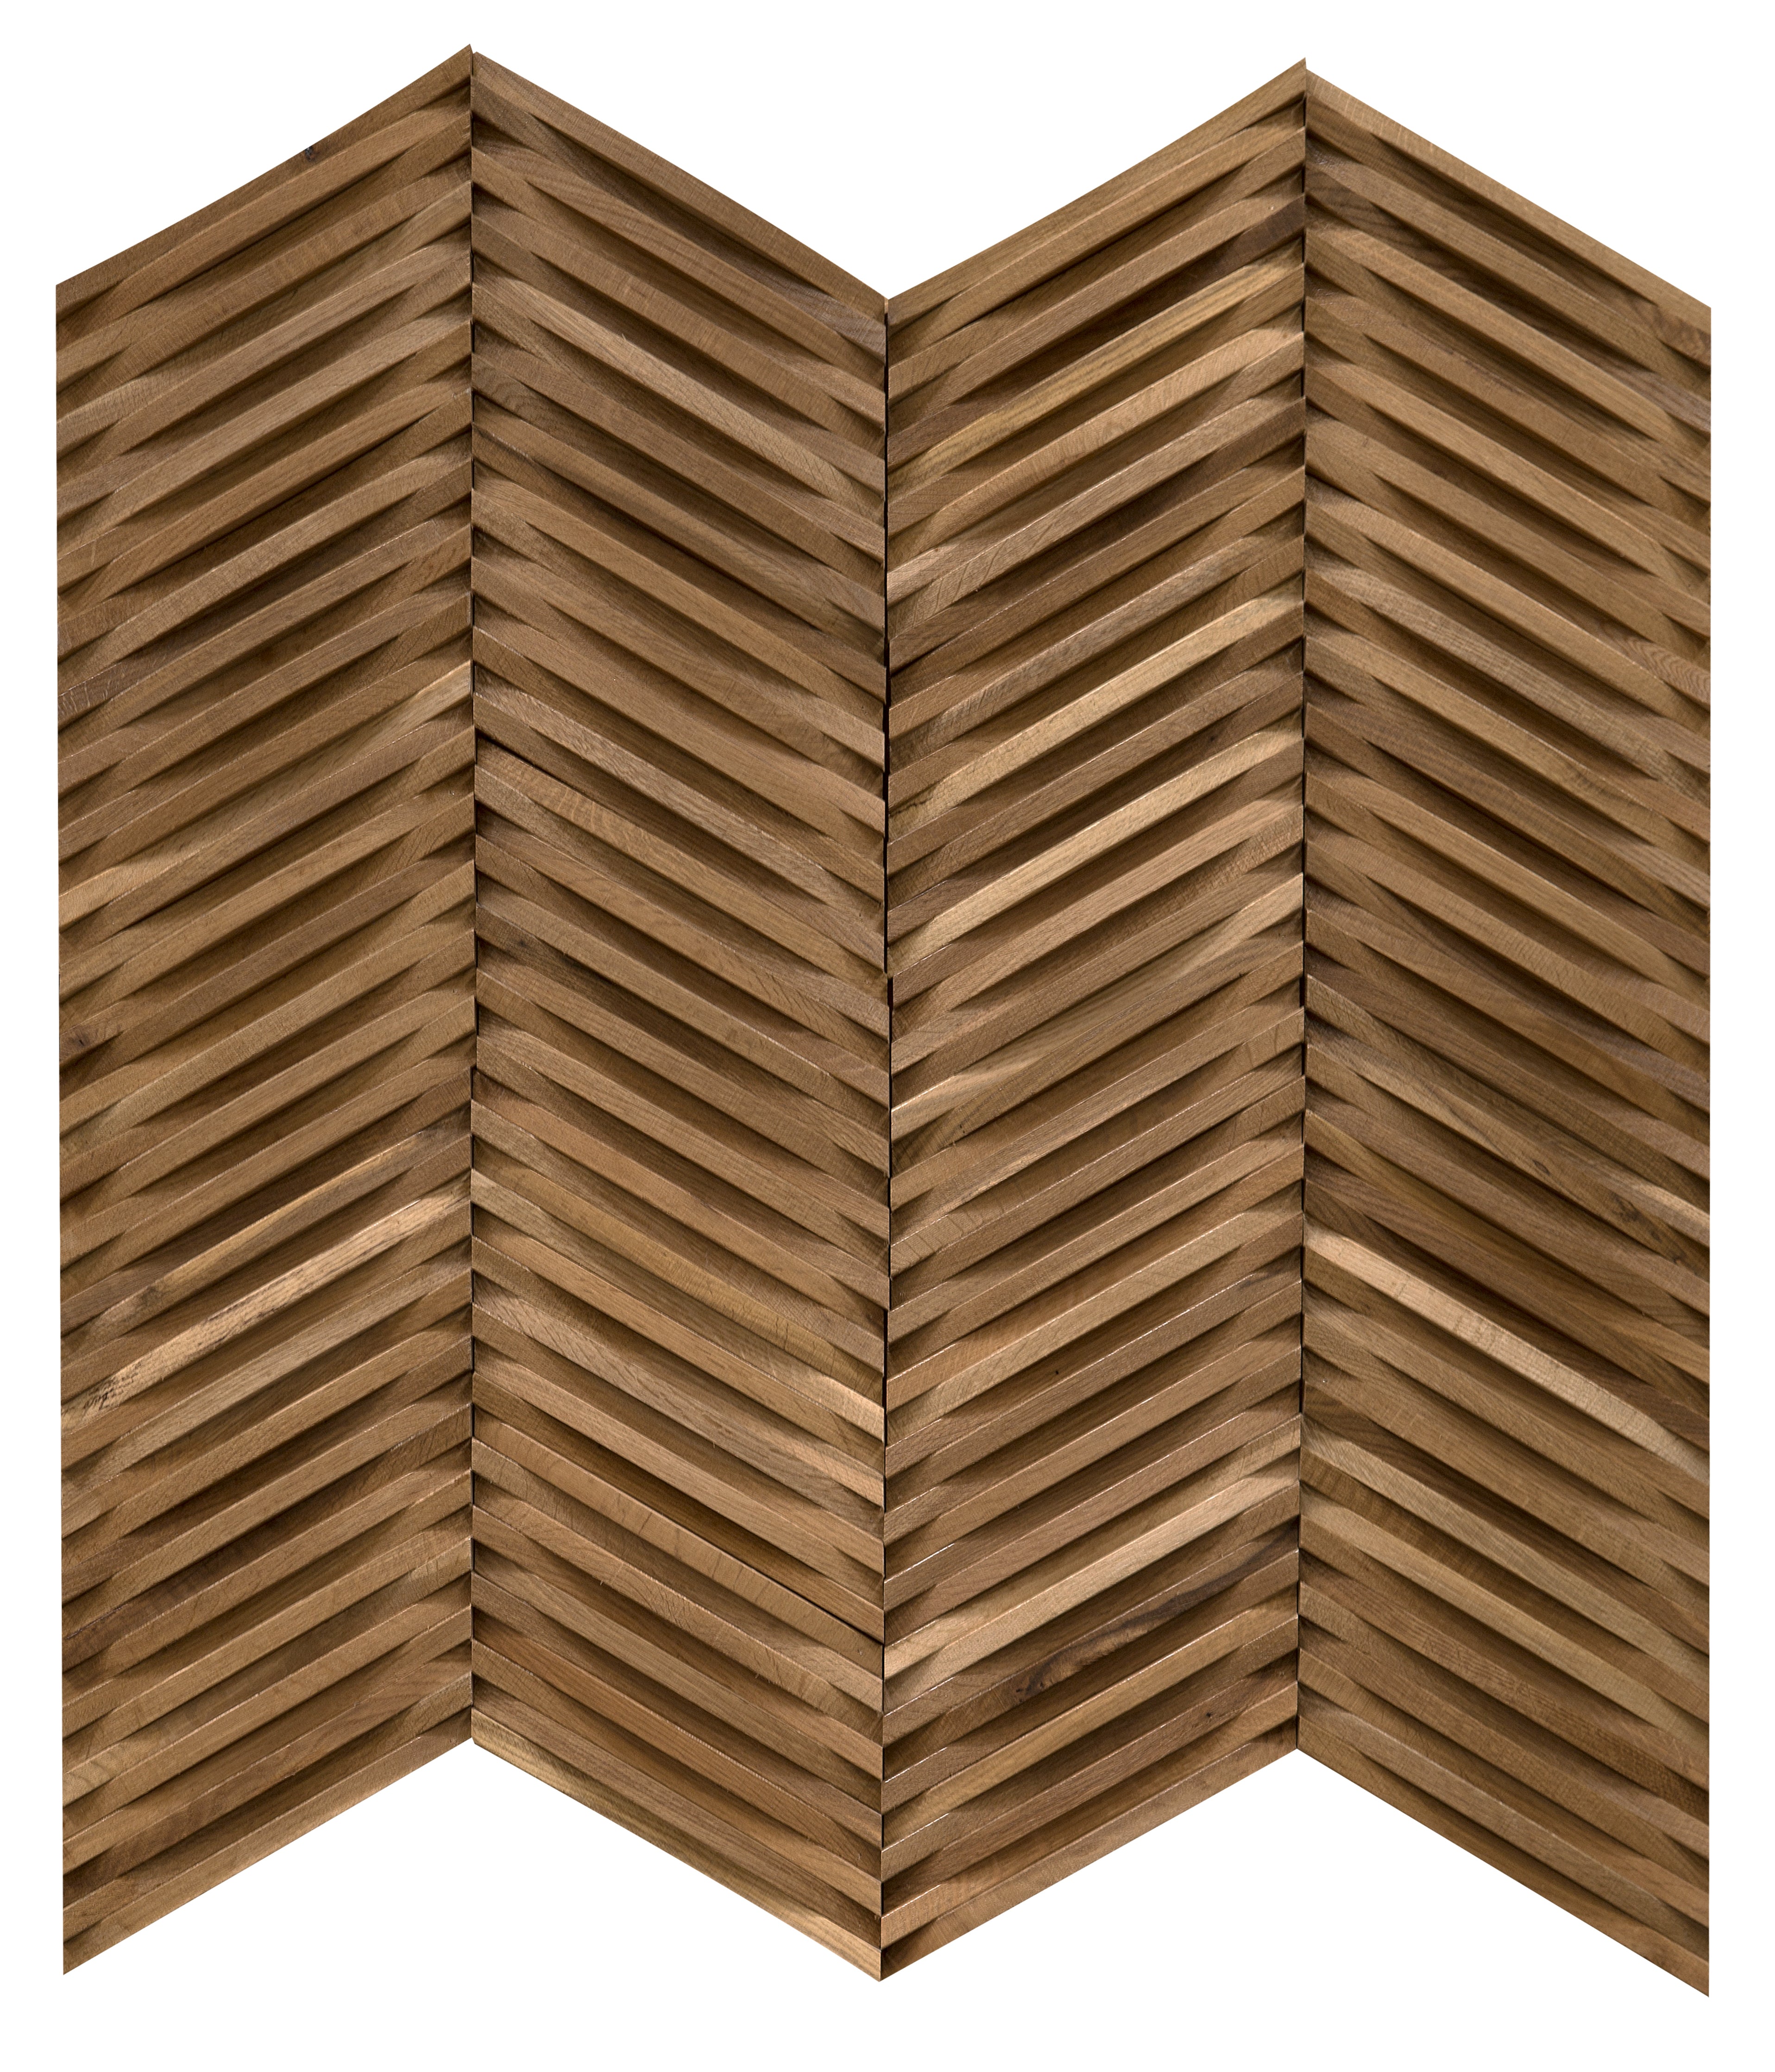 duchateau inceptiv curva chevron olde dutch oak three dimensional wall natural wood panel lacquer for interior use distributed by surface group international